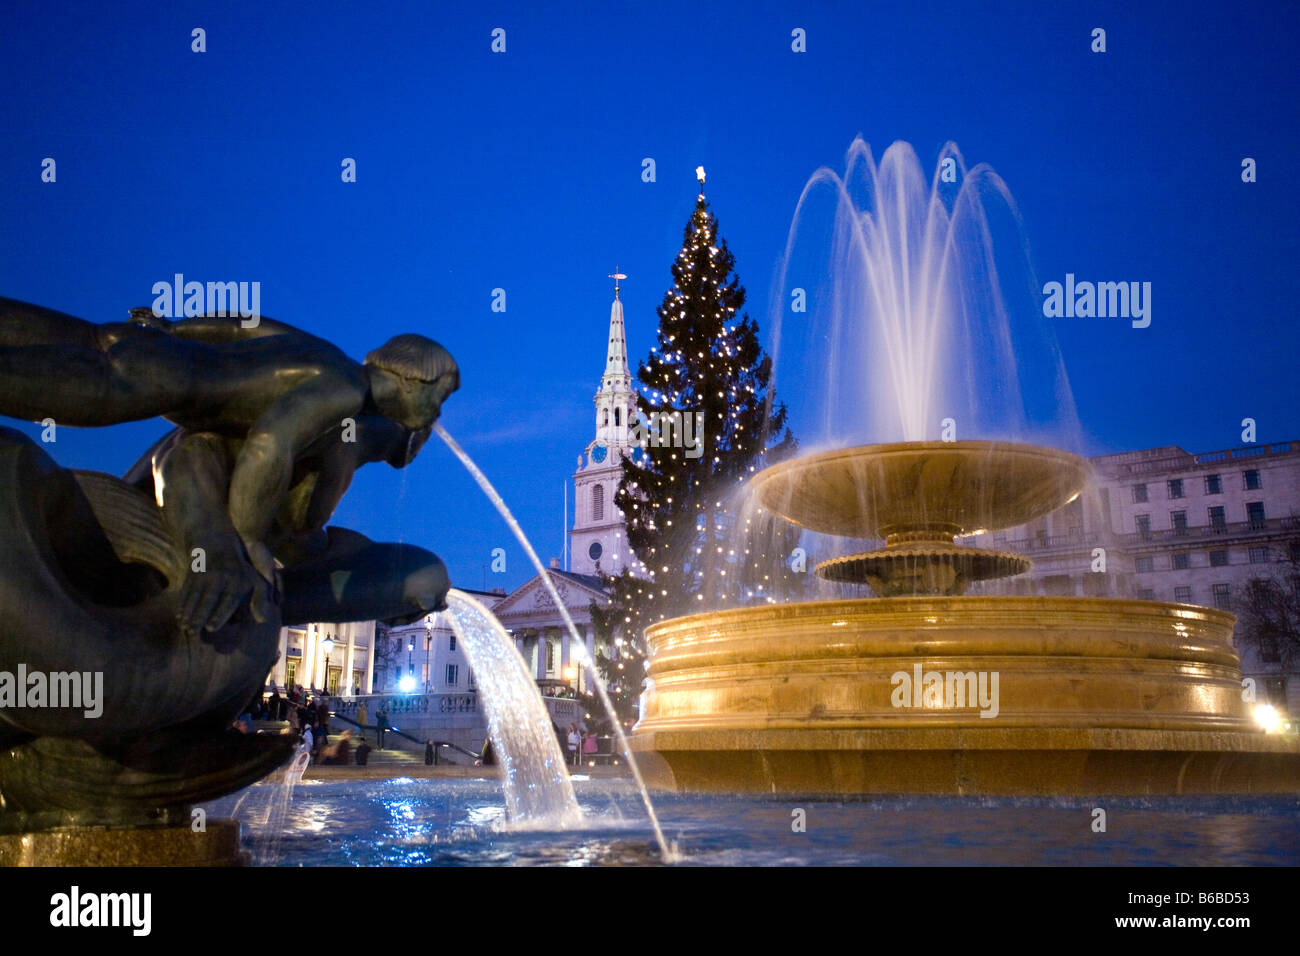 The Fountains and The Christmas Tree at Trafalgar Square in London Stock Photo